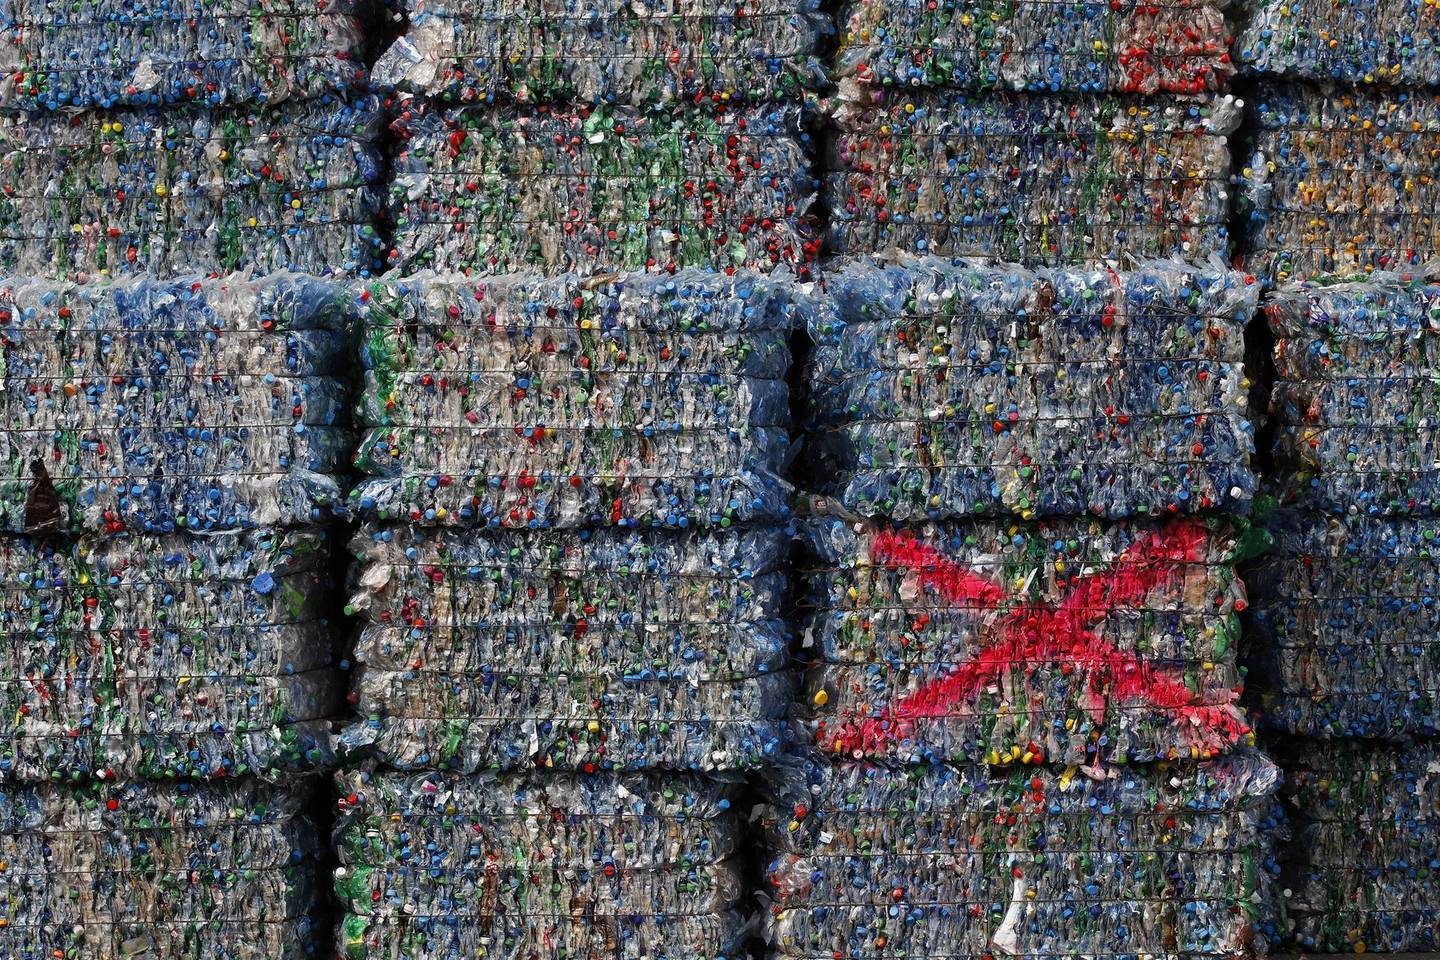 Crushed plastic bottles and containers sit bound in a bale ready to be recycled at the new Poly Recycling AG facility in Bilten, Switzerland, on Wednesday, April 3, 2019. The economics of plastic recycling  have suddenly been upended, thanks to a Chinese import ban and cheap U.S. oil used to make virgin plastic. Photographer: Stefan Wermuth/Bloomberg